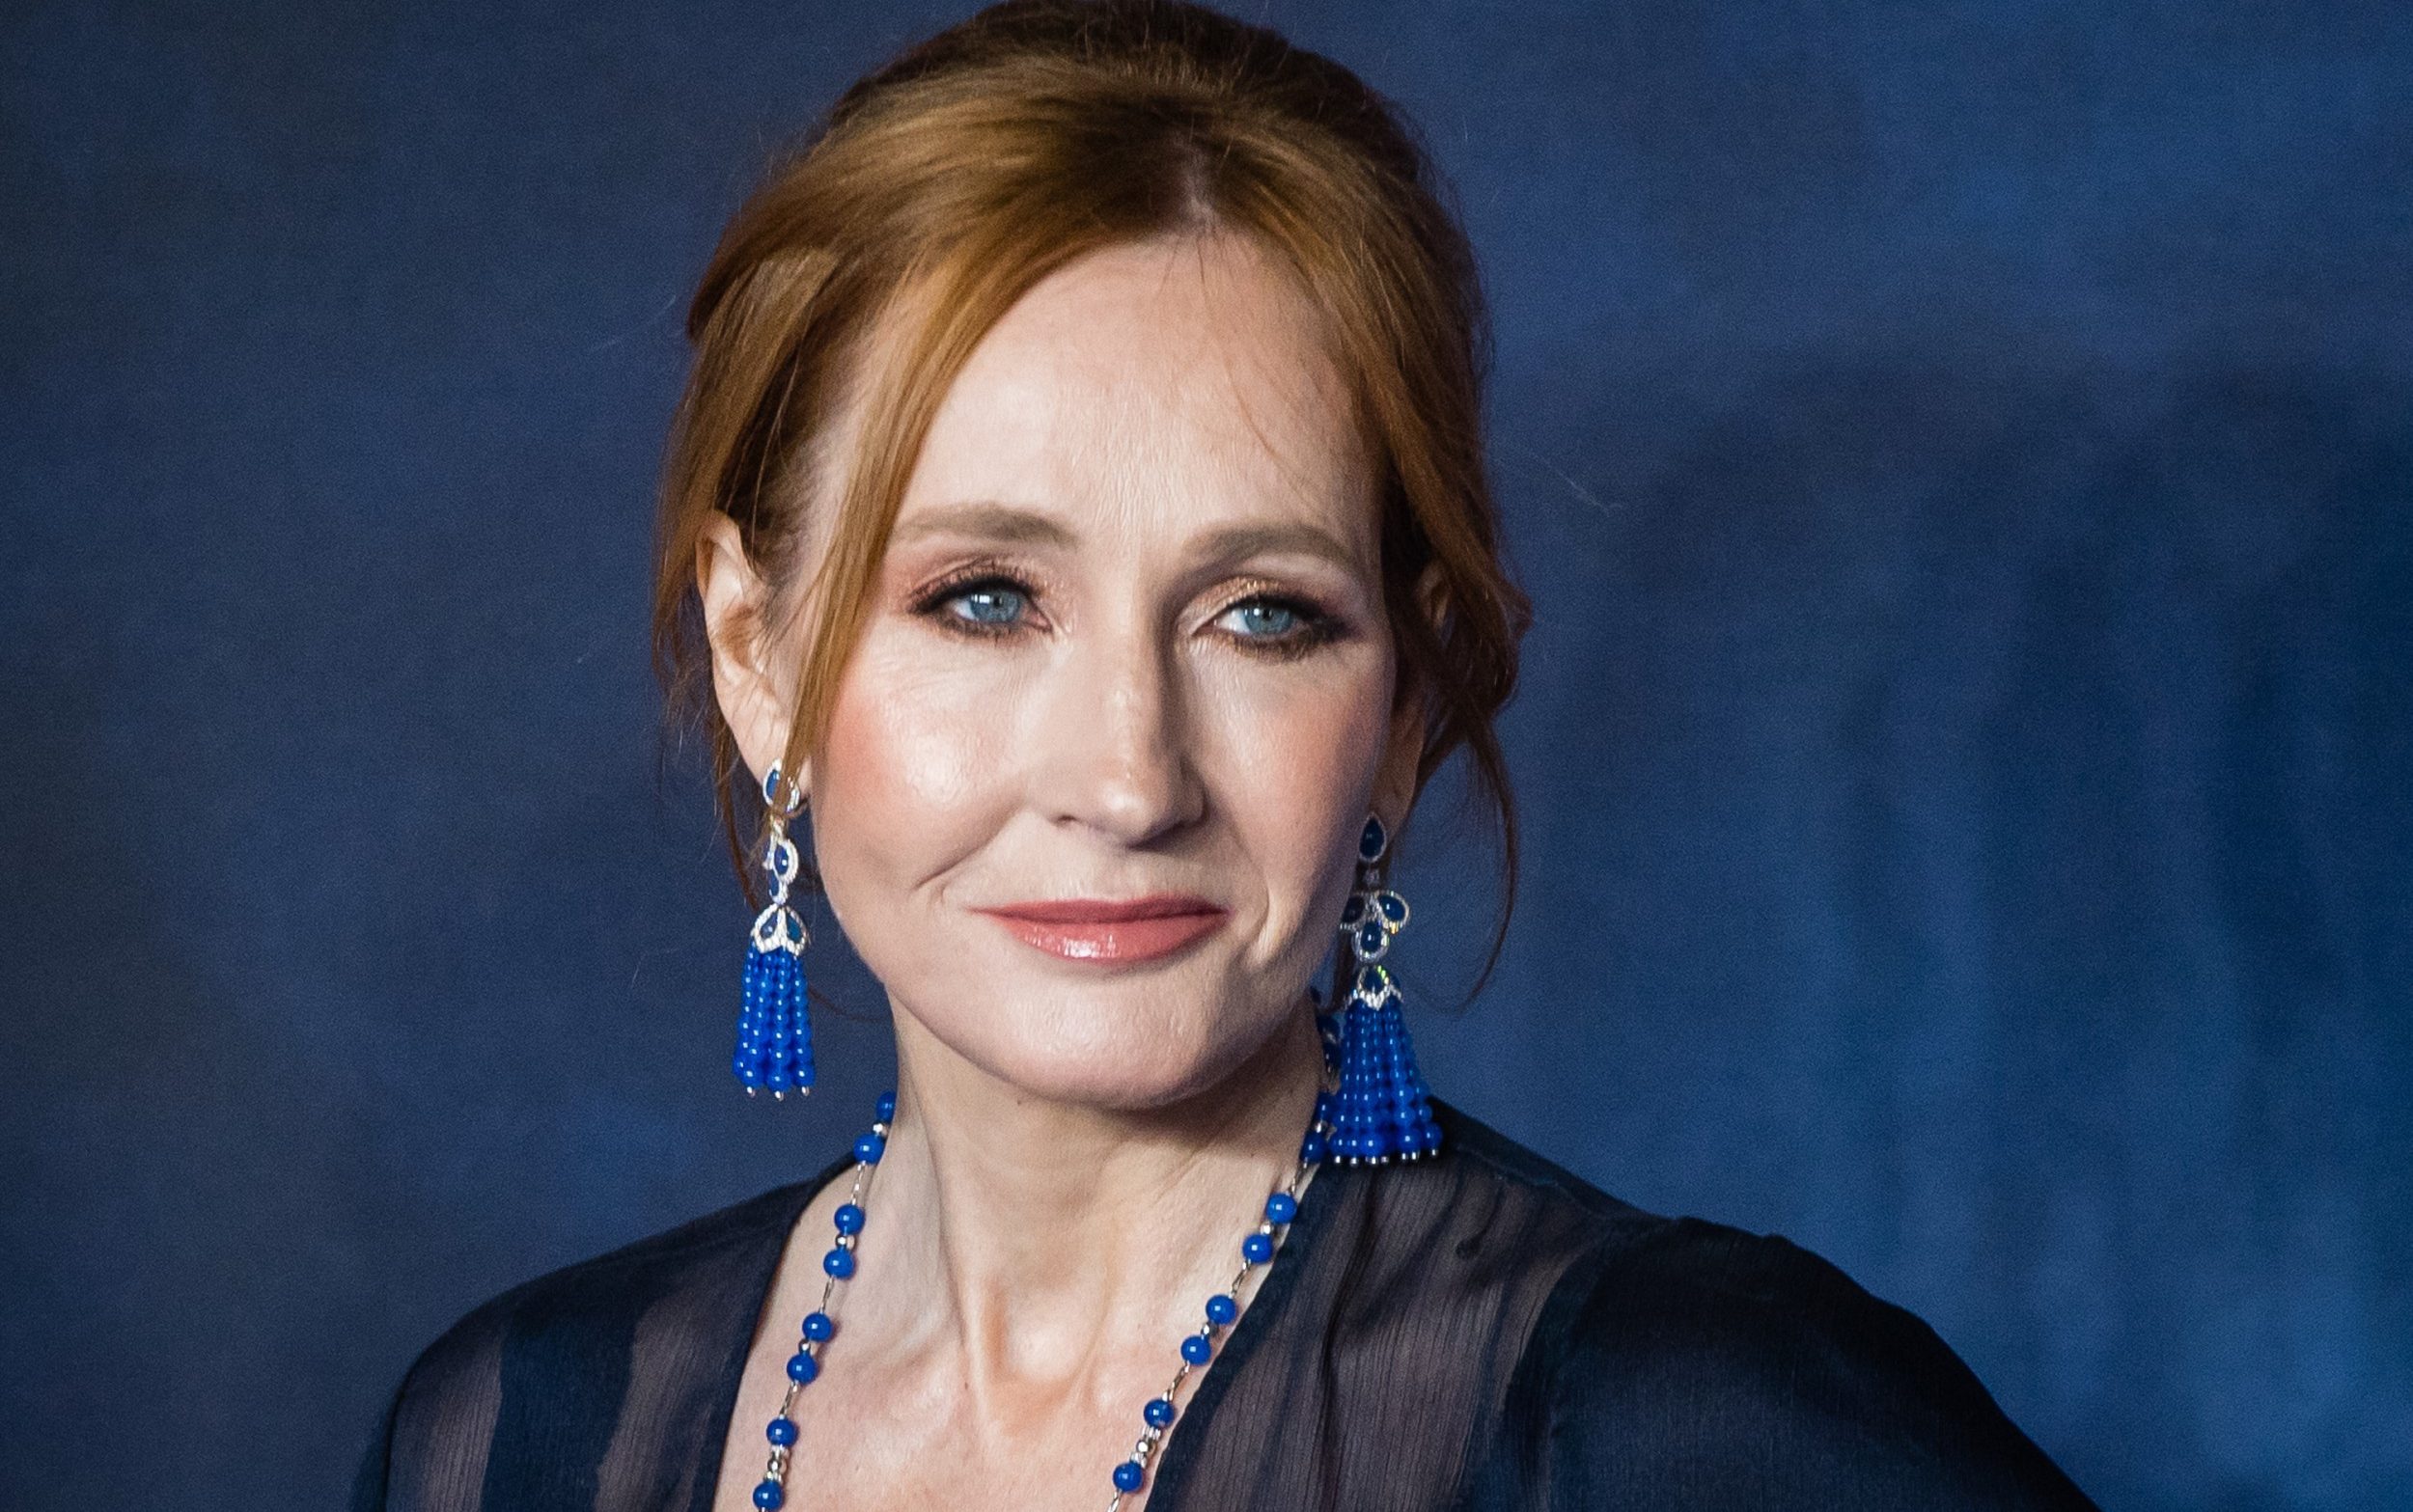 jk rowling donates £70k to challenge ruling that men can become women